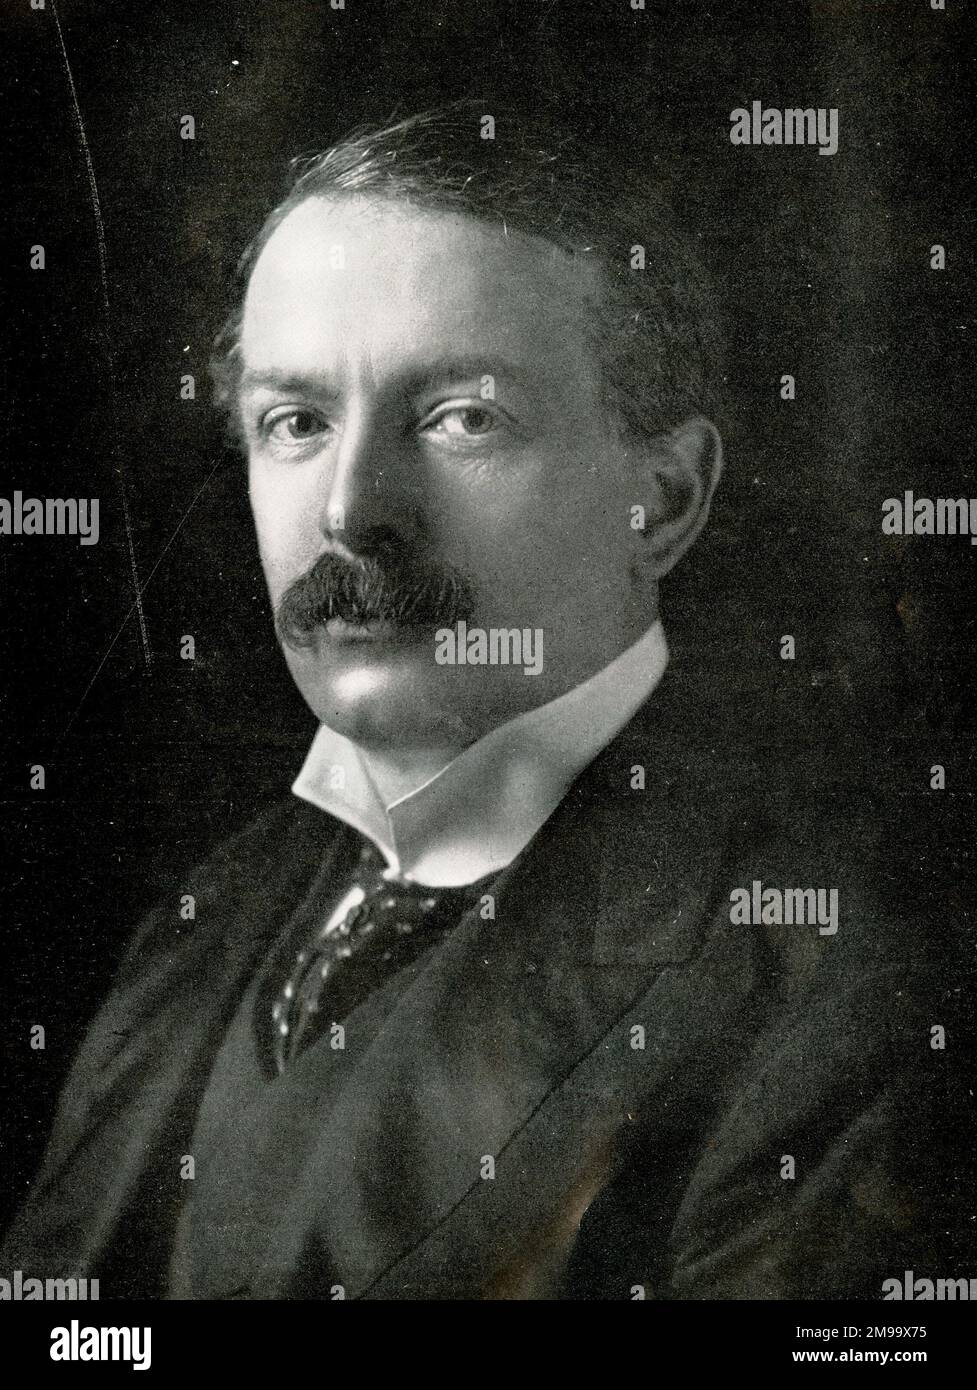 David Lloyd George, Chancellor of the Exchequer, Liberal Party. Stock Photo